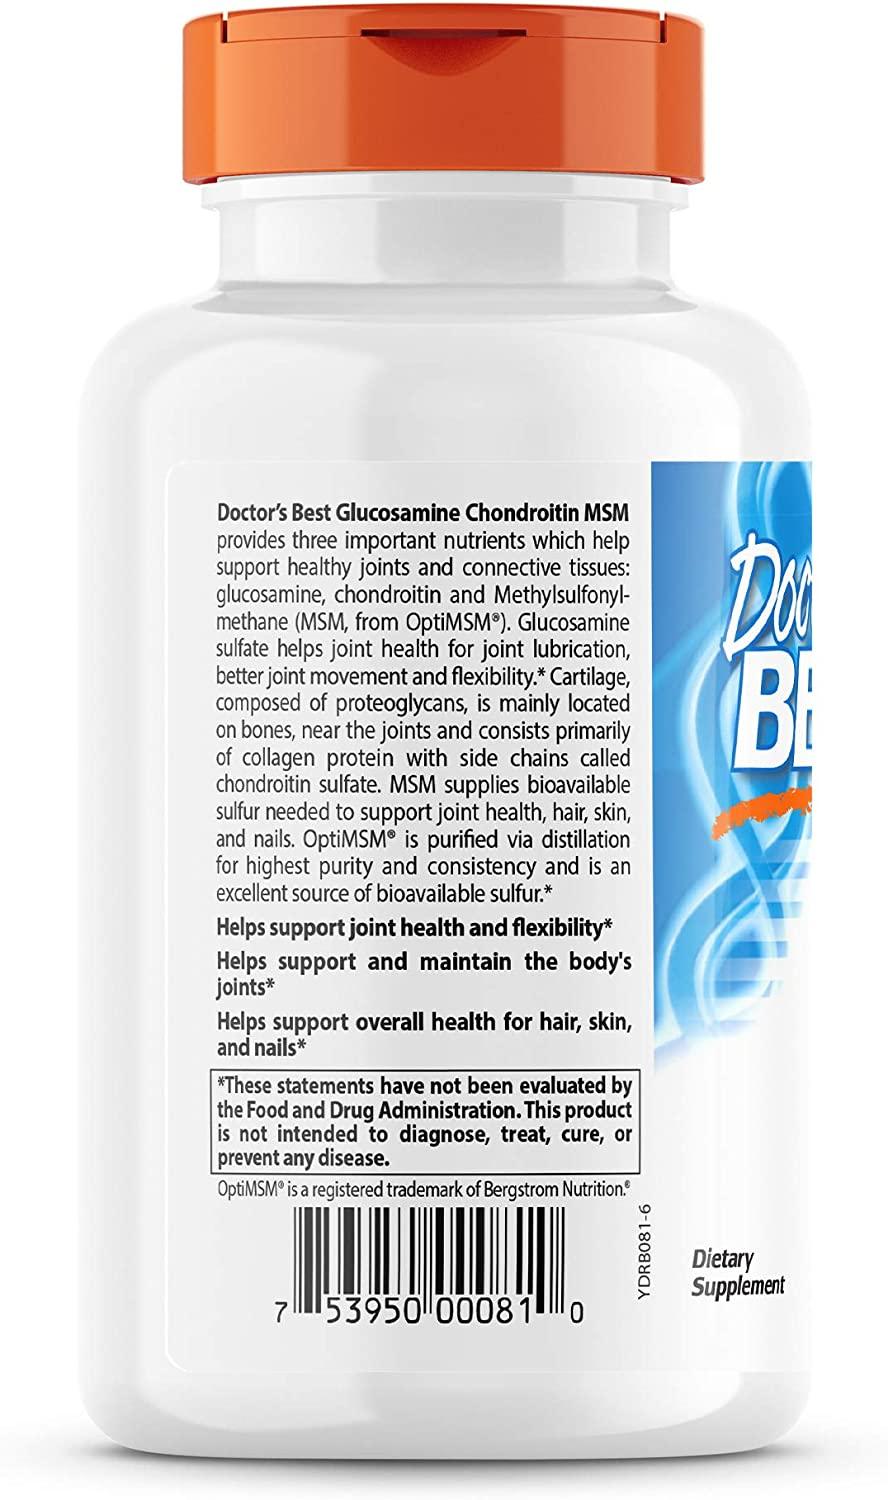 Doctors Best Glucosamine Chondroitin Msm With Optimsm Capsules Supports Healthy Joint